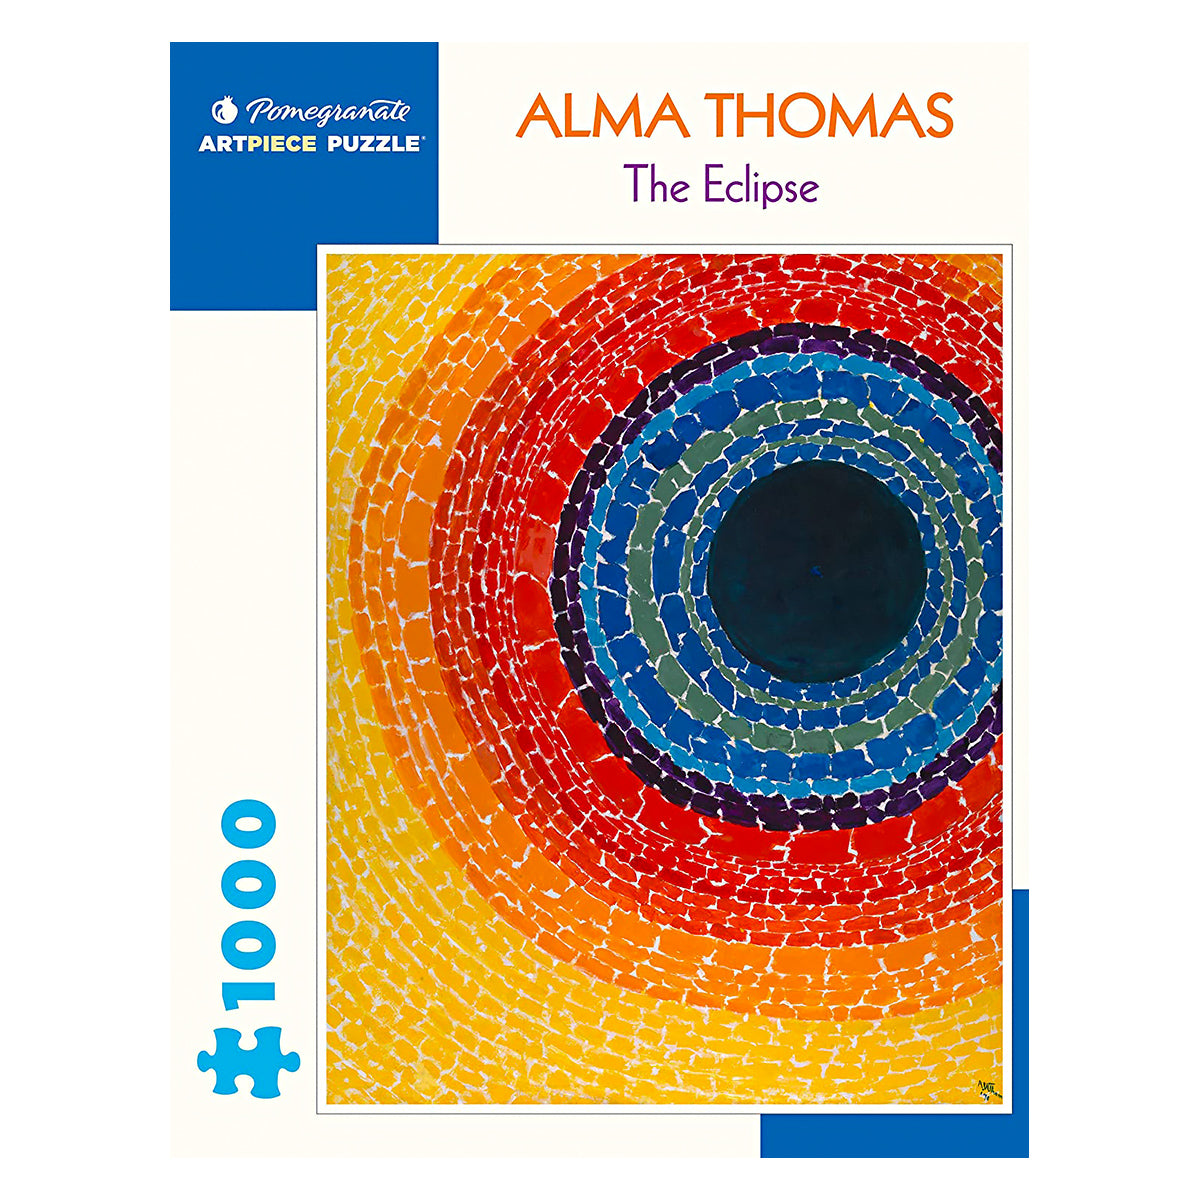 Black History Month: 1000-piece Alma Thomas The Eclipse Jigsaw Puzzle